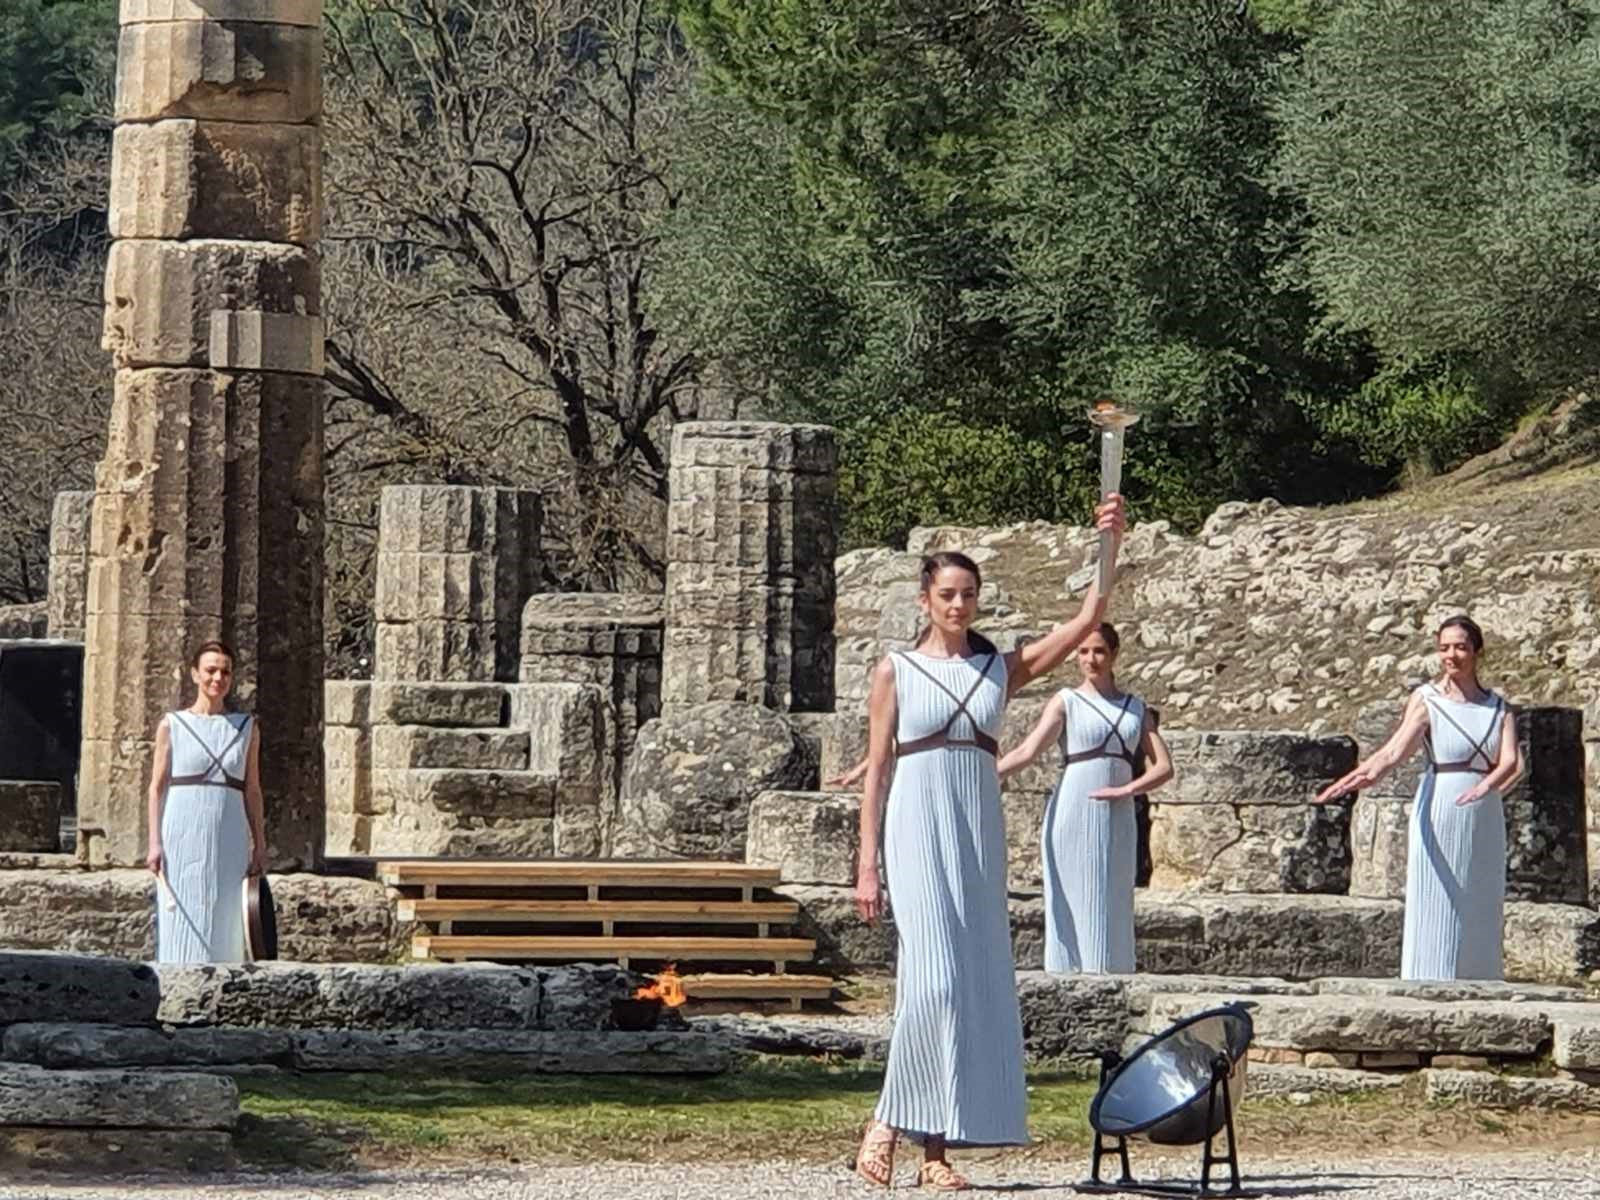 The final rehearsal took place in Ancient Olympia ahead of Thursday's Flame-lighting Ceremony ©Hellenic Olympic Committee